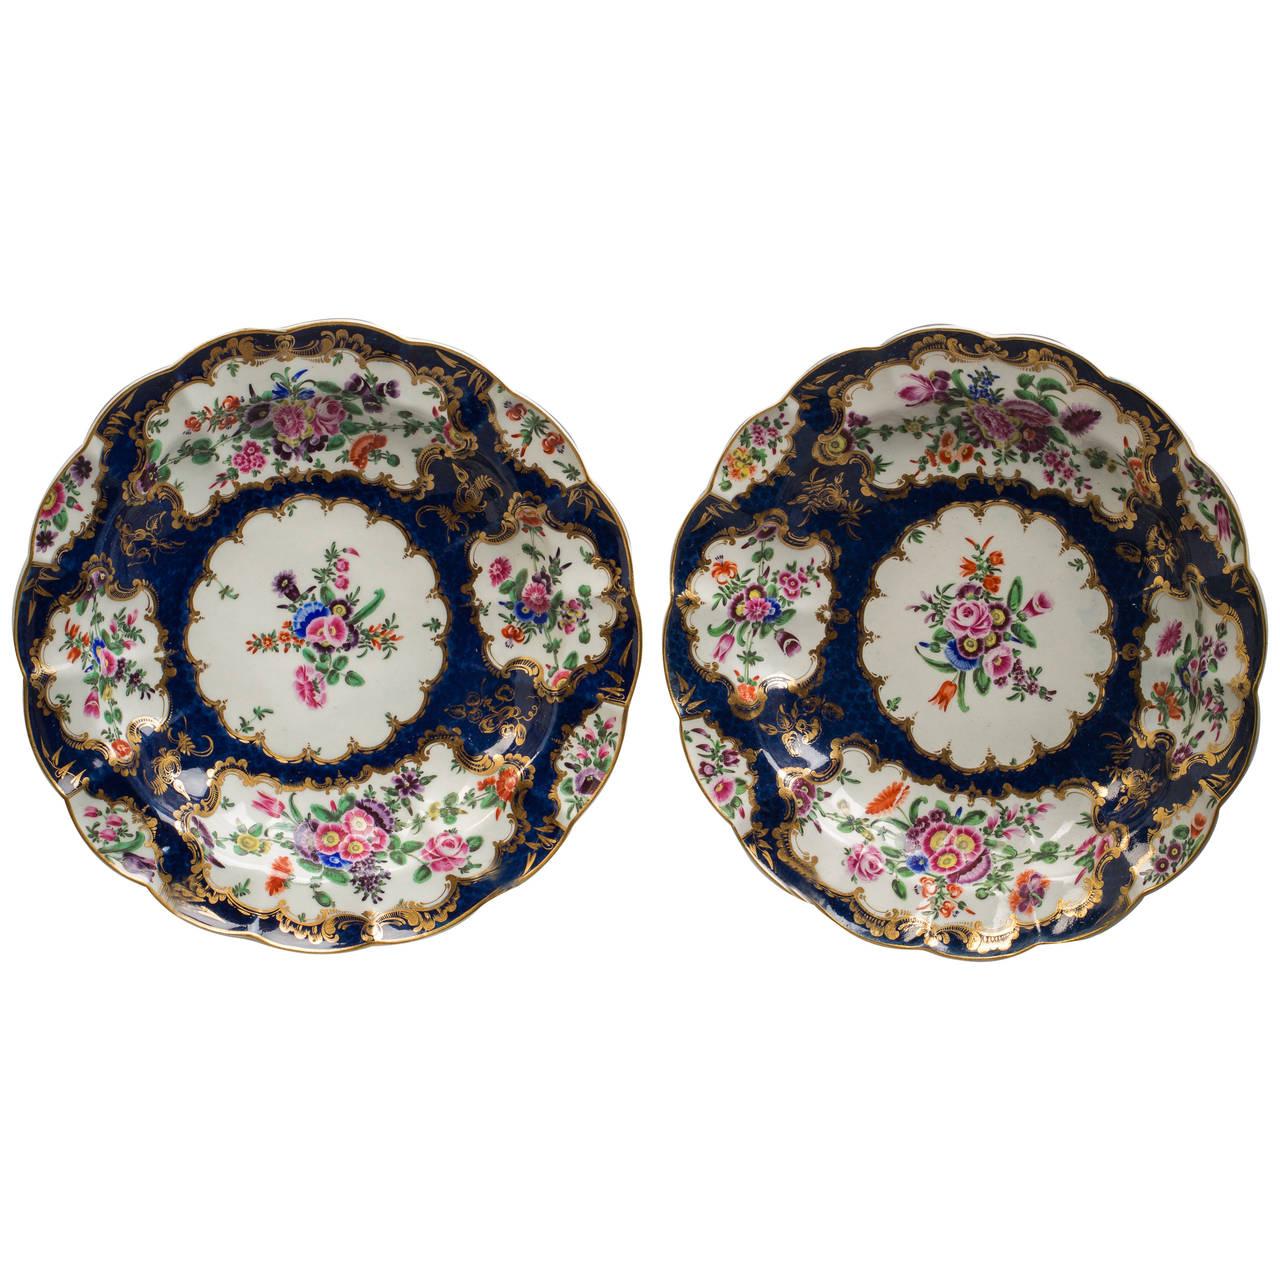 18th Century Pair of English Porcelain Blue-Scale Scalloped Plates, Worcester, circa 1770